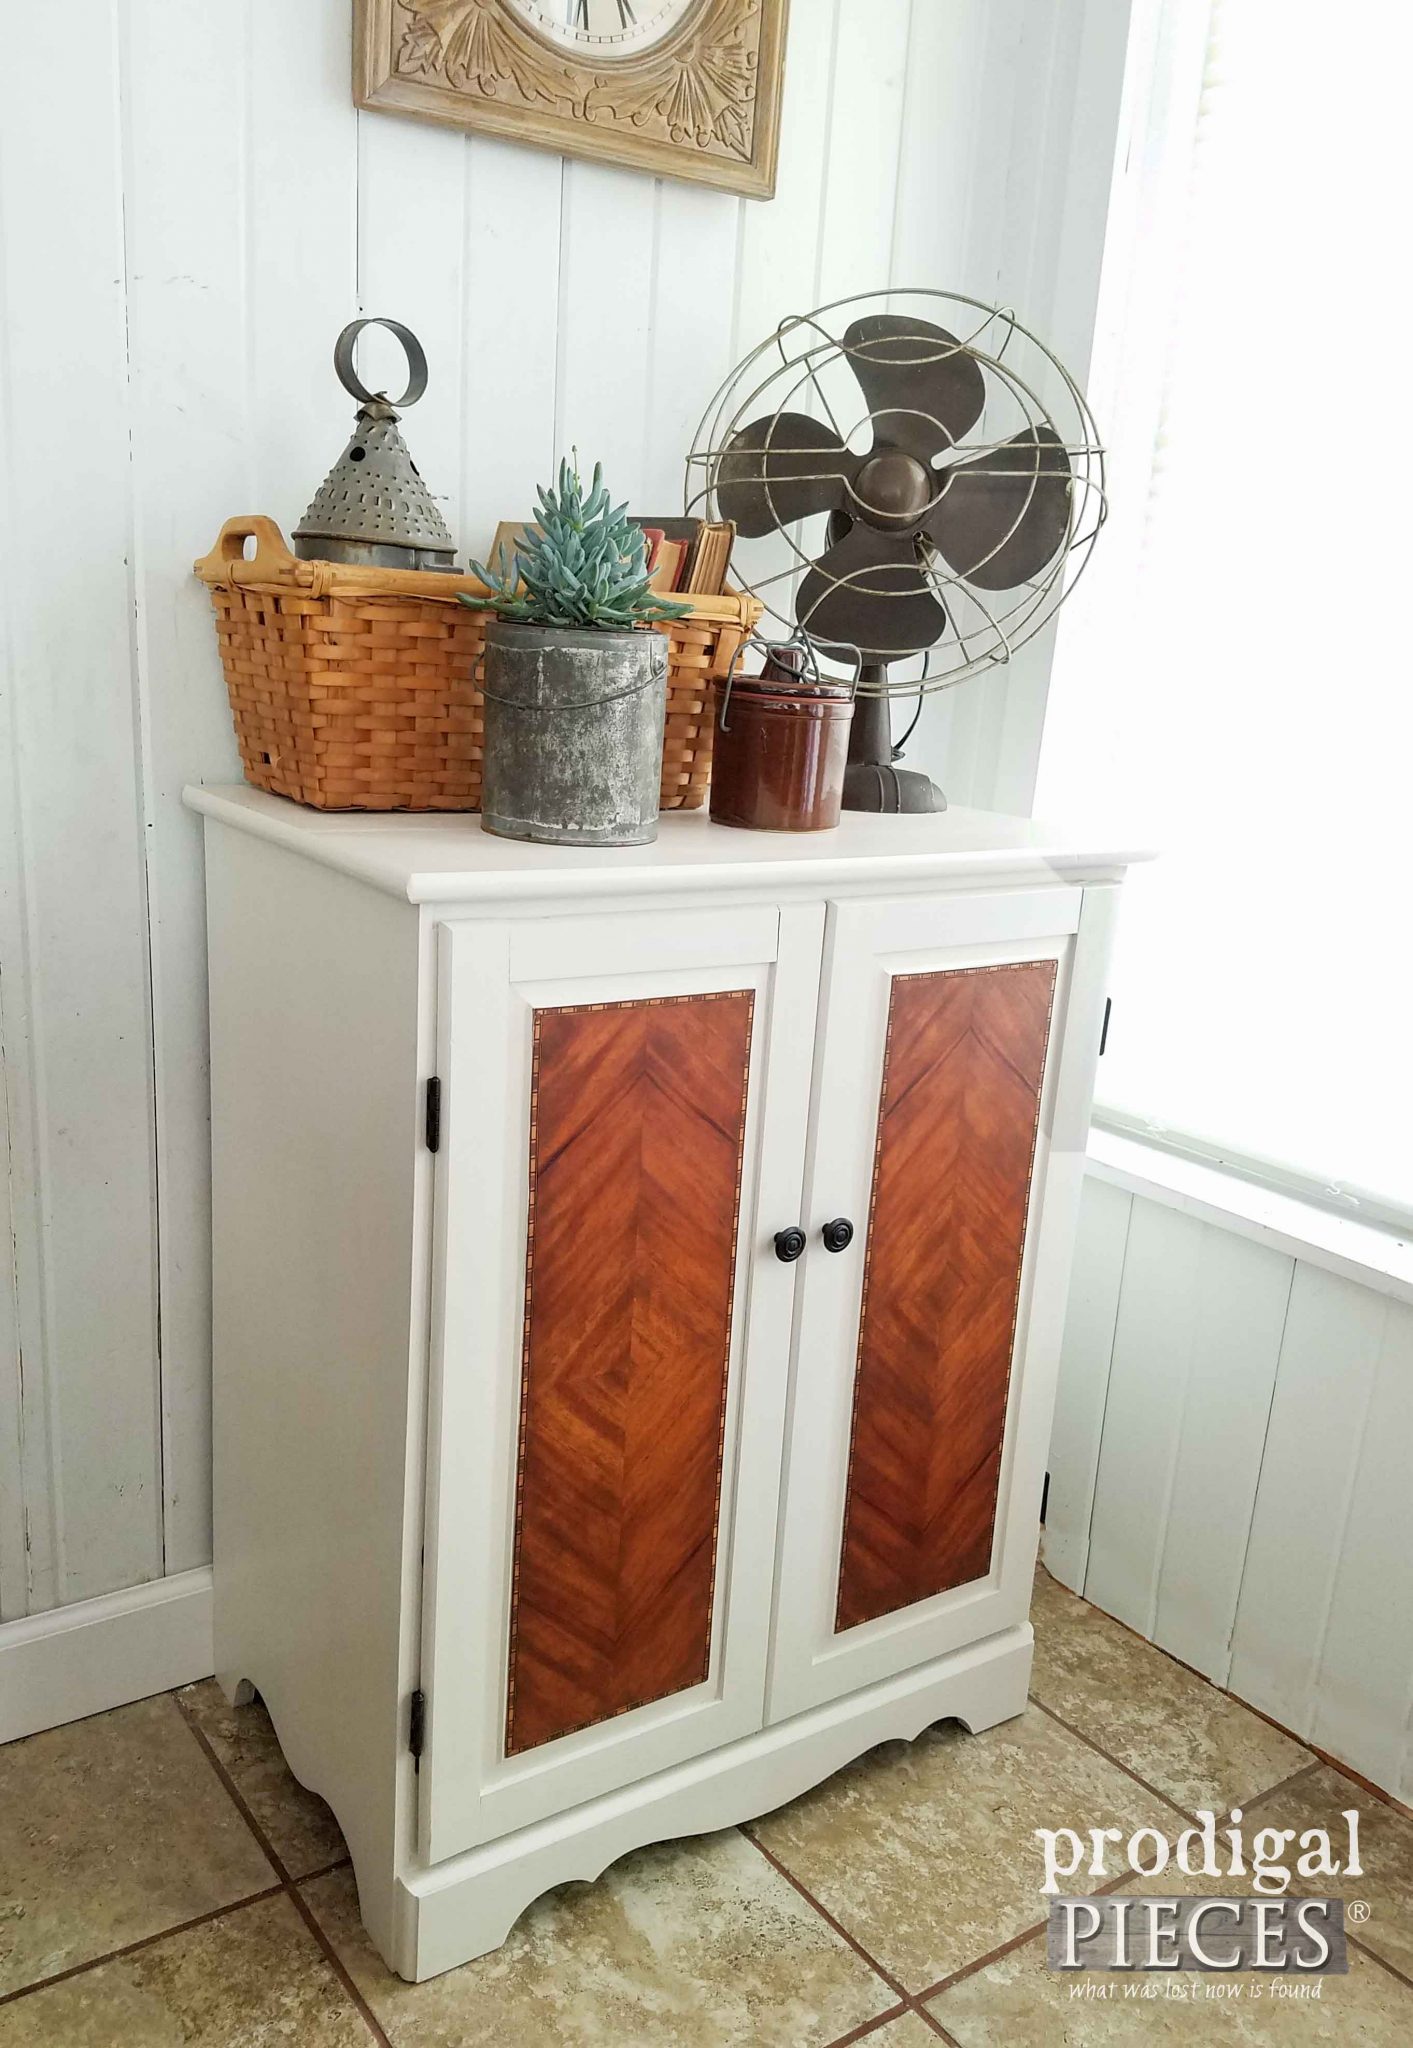 Farmhouse Chic Cabinet with Details on How to get the Look by Prodigal Pieces | prodigalpieces.com